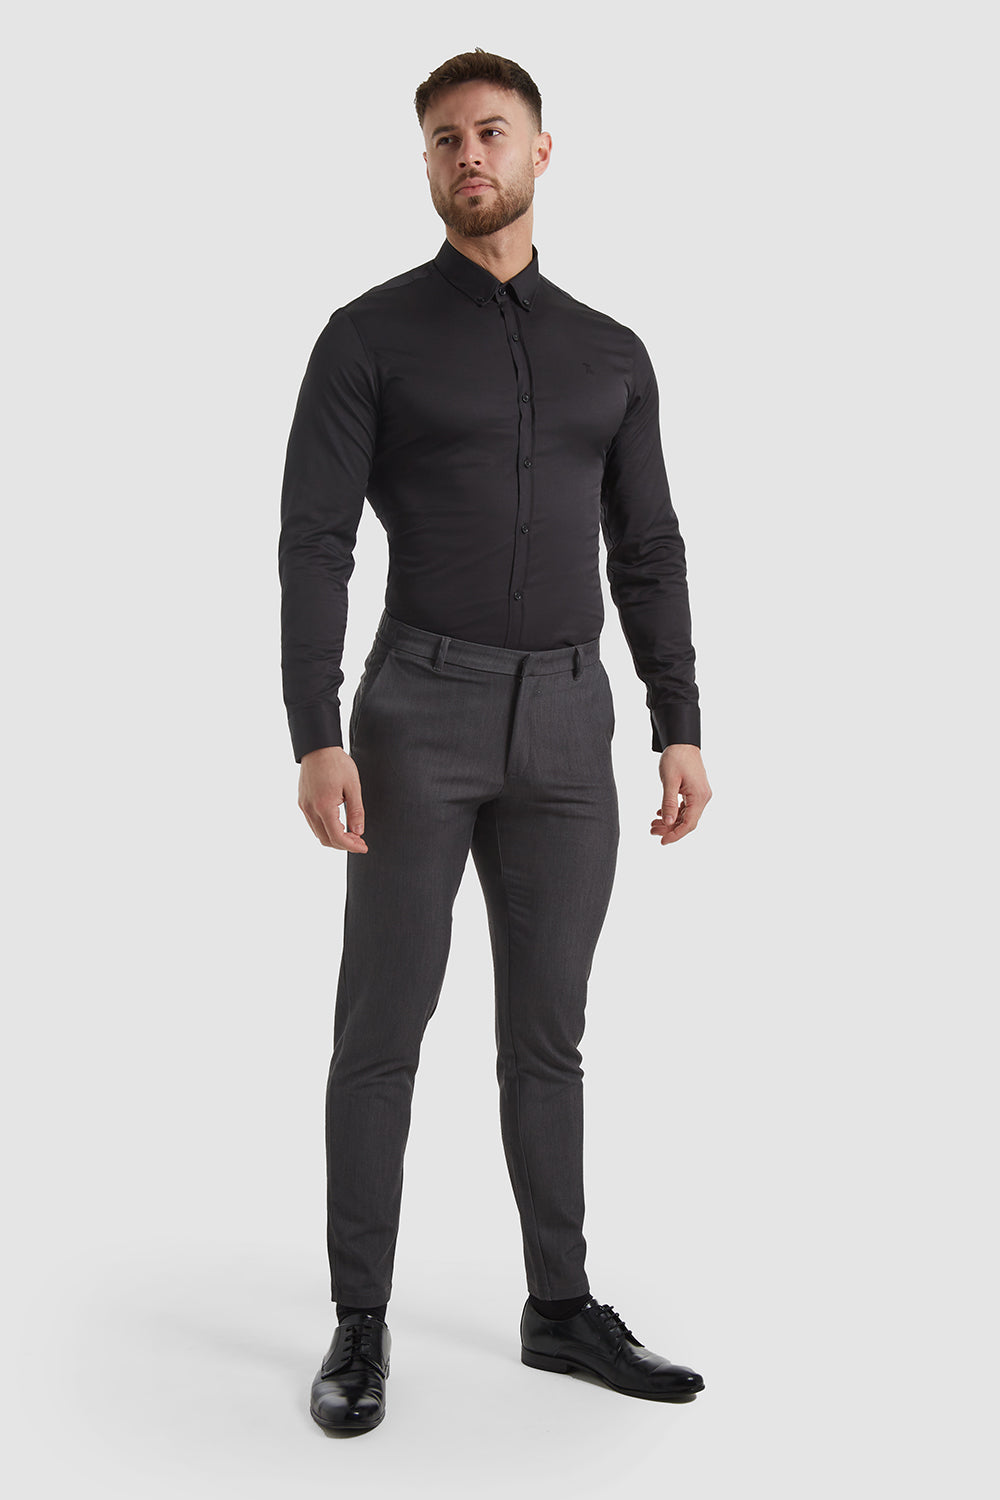 Muscle Fit Essential Trousers 2.0 in Charcoal - TAILORED ATHLETE - ROW